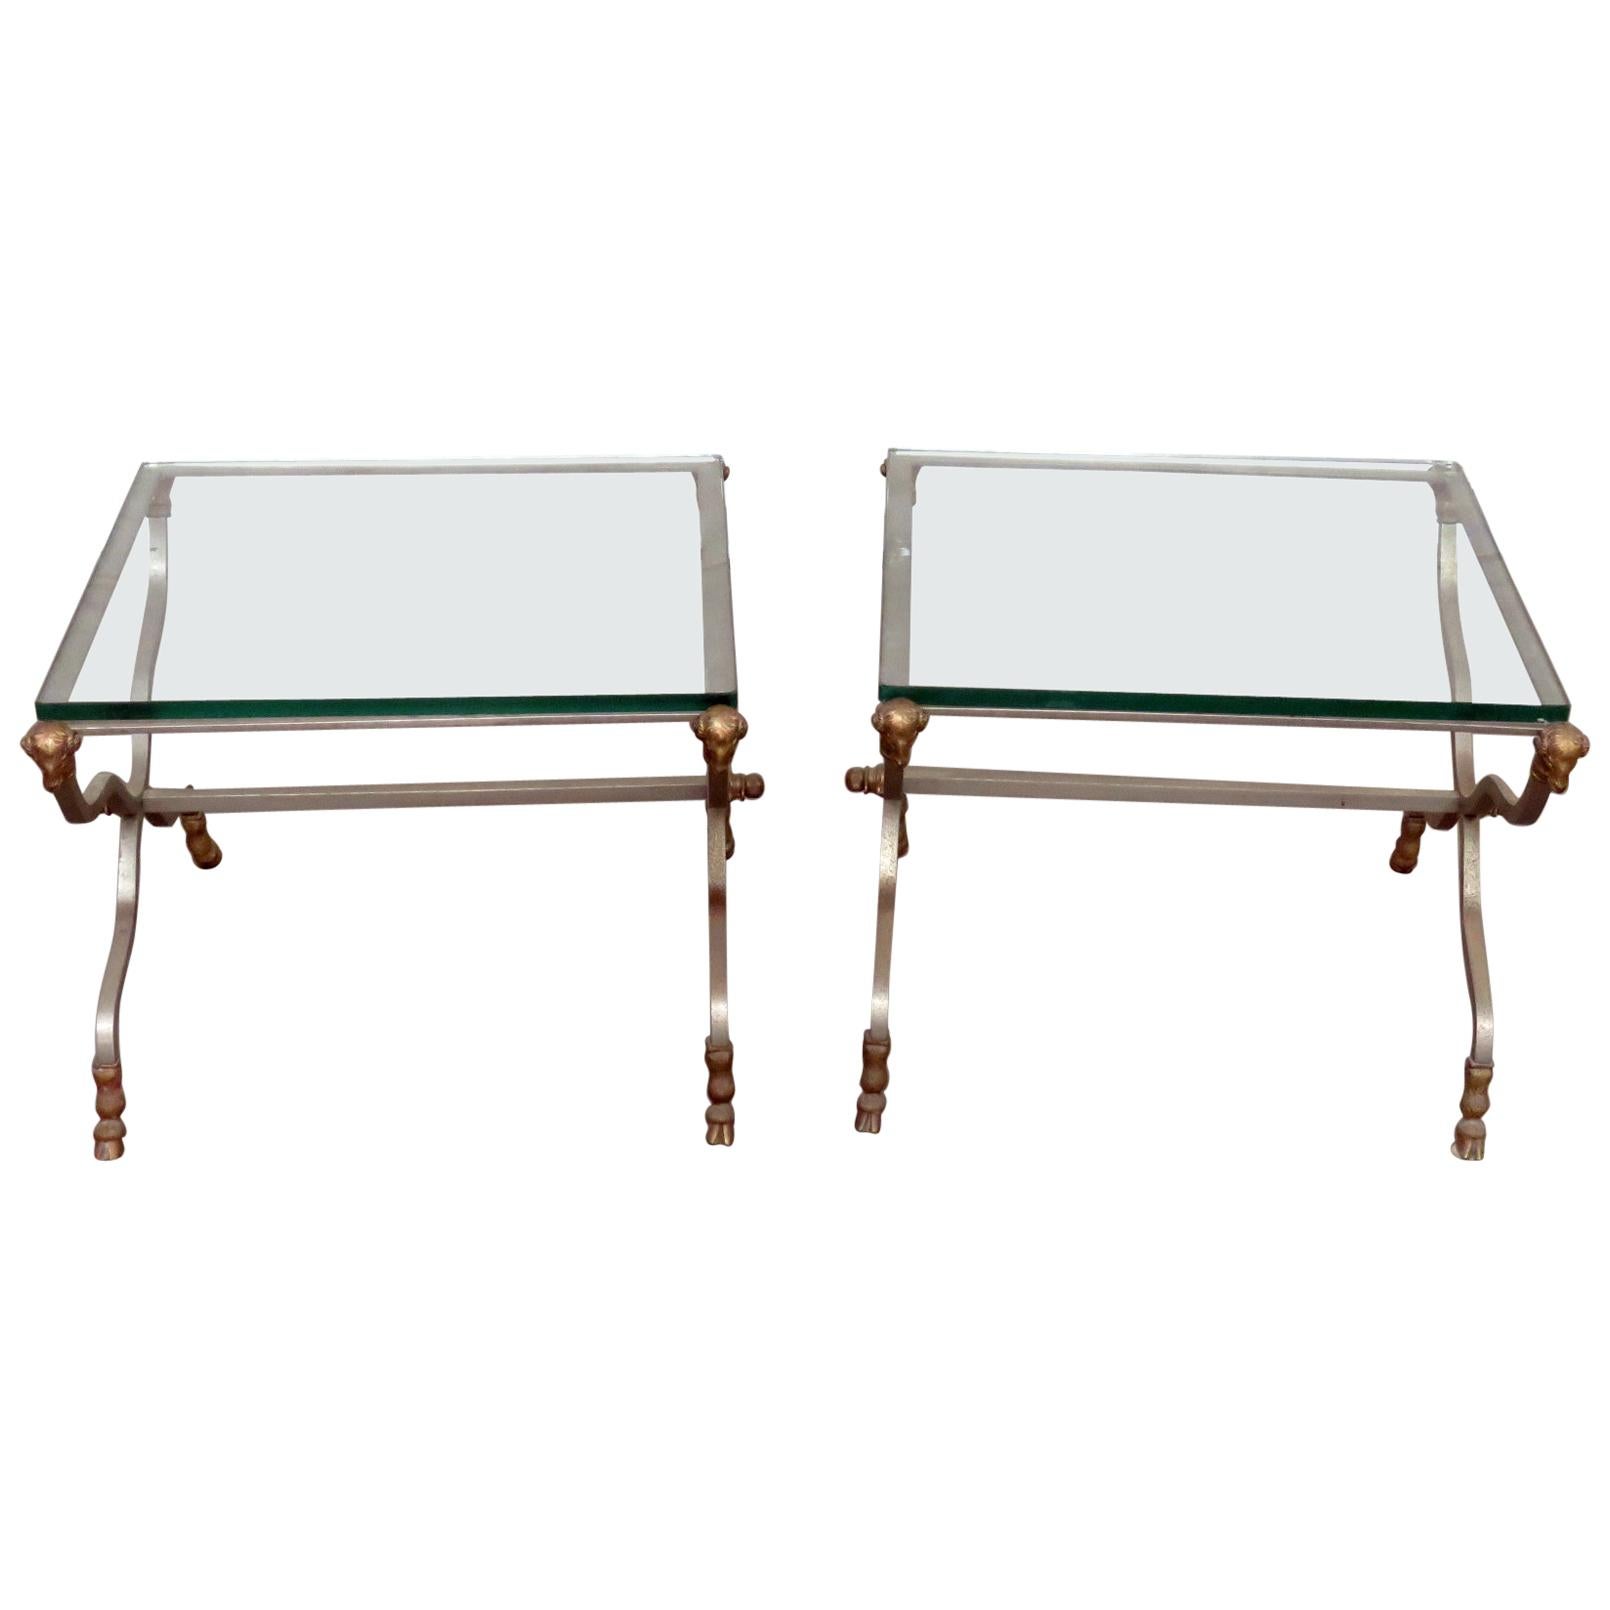 Pair of Maison Jansen Style Rams Head Brass and Steel Glass Top End Tables